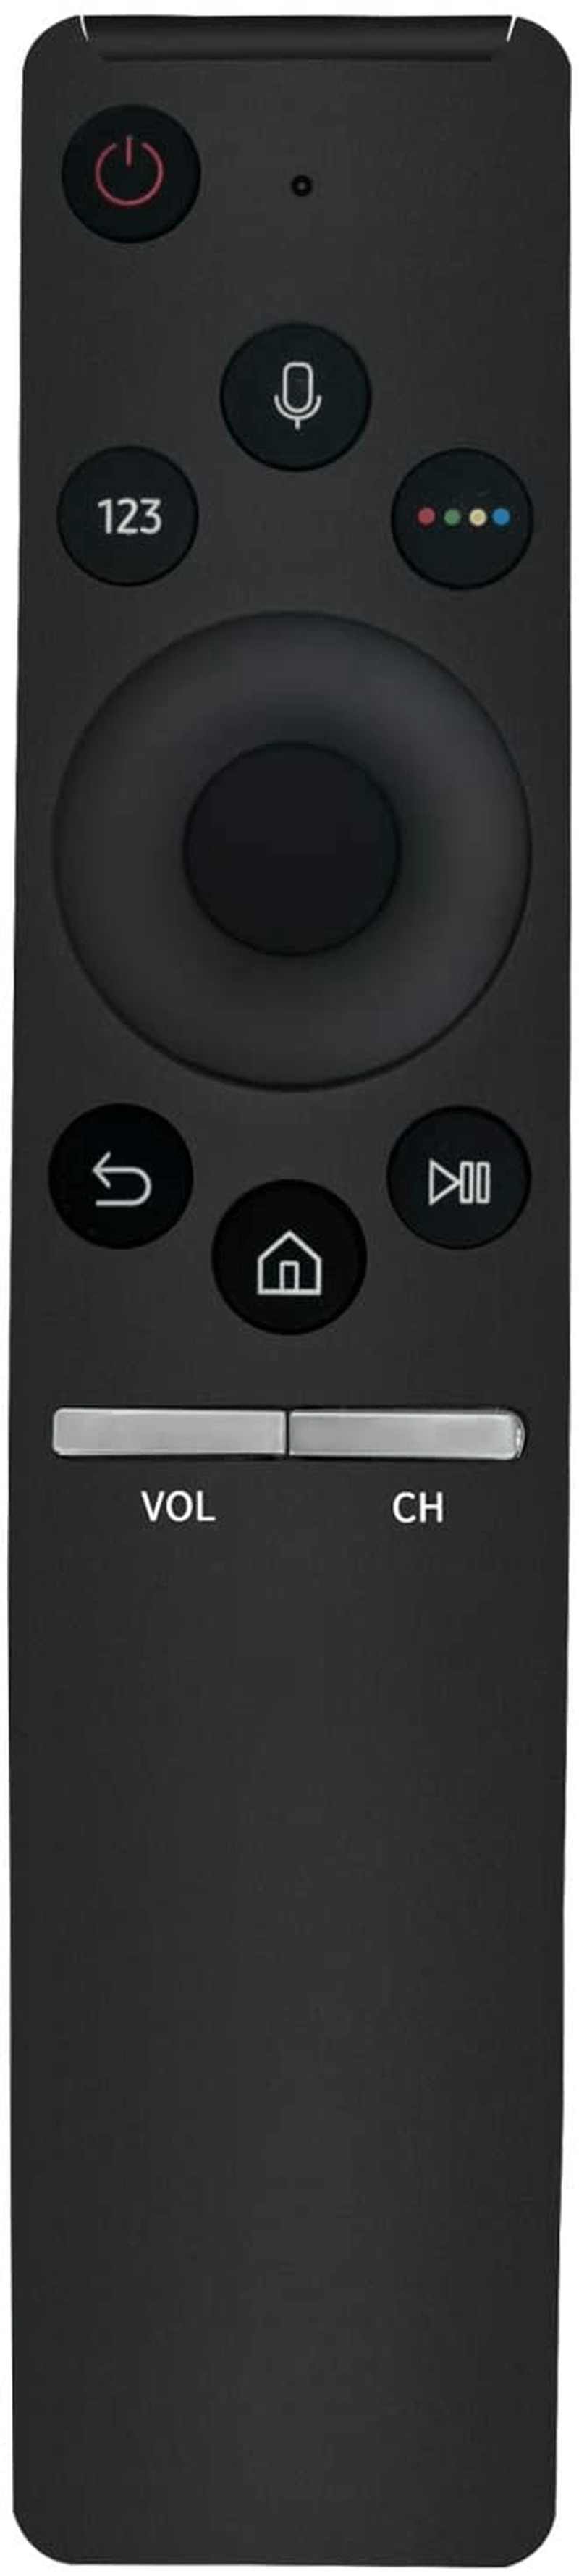 BN59-01266A Replaced Voice Remote fit for Samsung Smart 4K TV BN5901266A RMCSPM1AP1 QN65Q7FD UN75MU630D UN50MU630D UN65MU850D UN43MU630D UN55MU630D UN55MU650D UN55MU700D UN55MU800D UN65MU650D Electronics > Electronics Accessories > Remote Controls Vinabty Default Title  